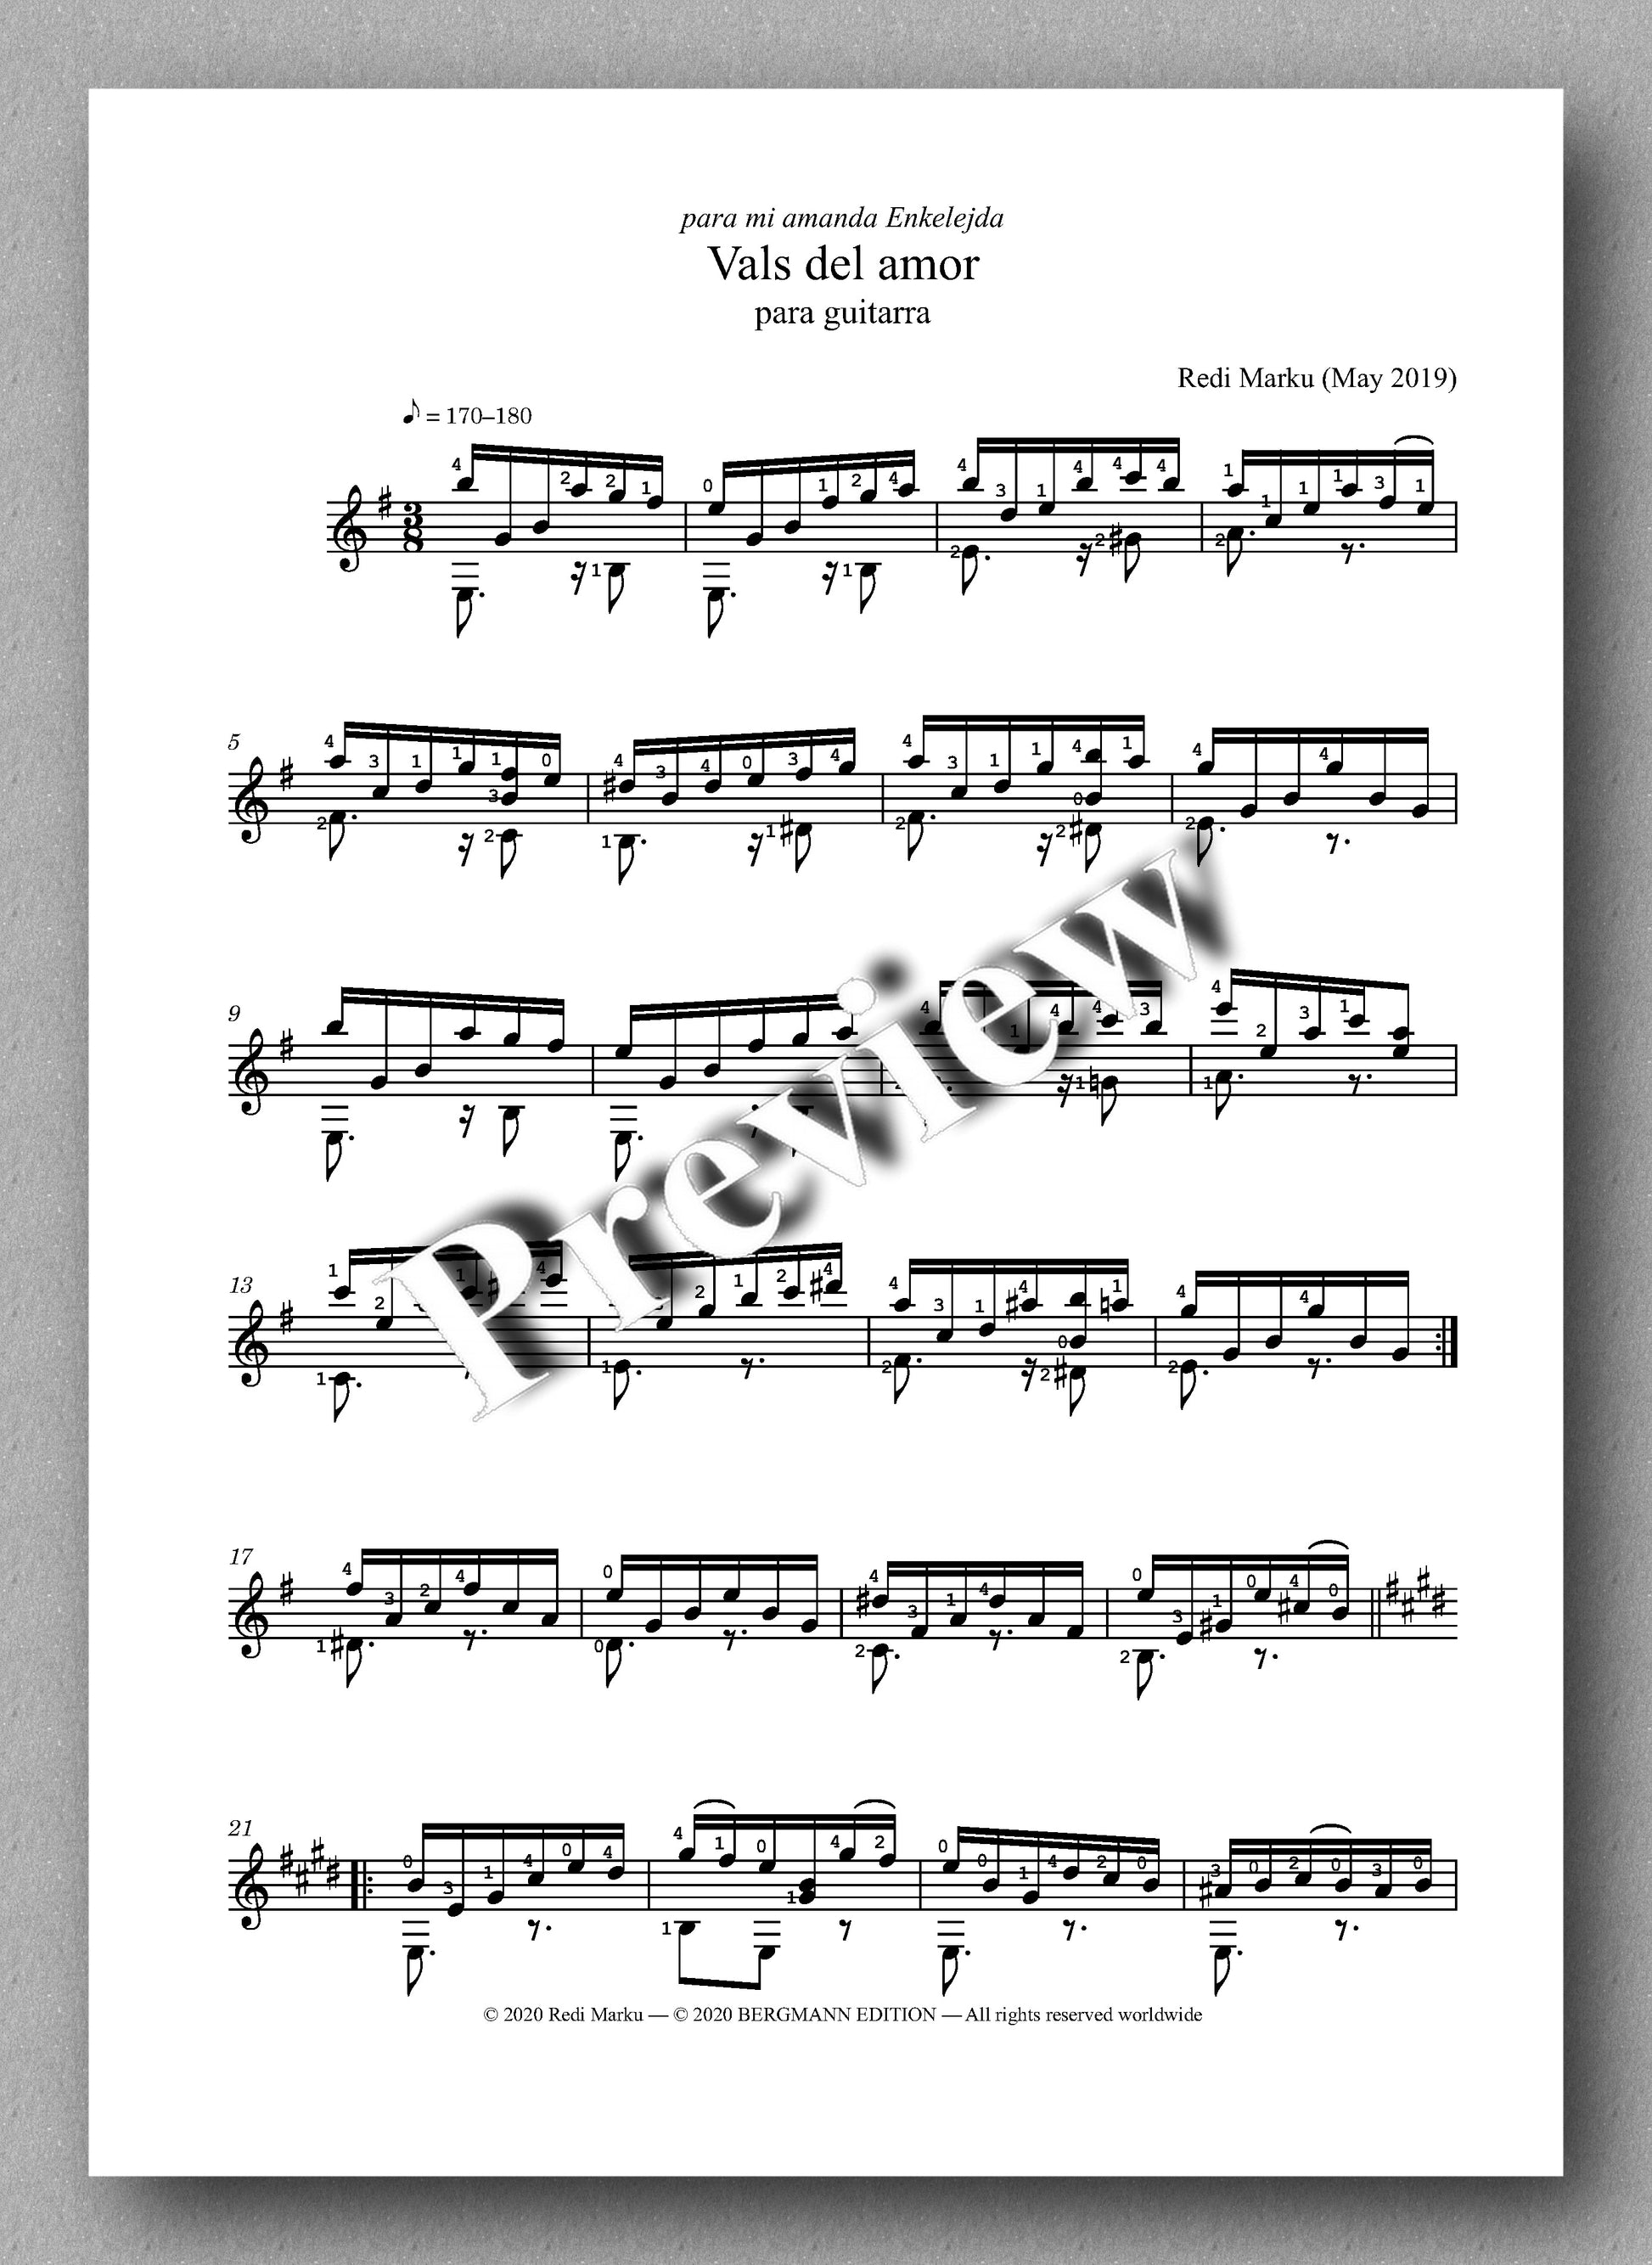 Vals del amor by Redi Marku - preview of the music score